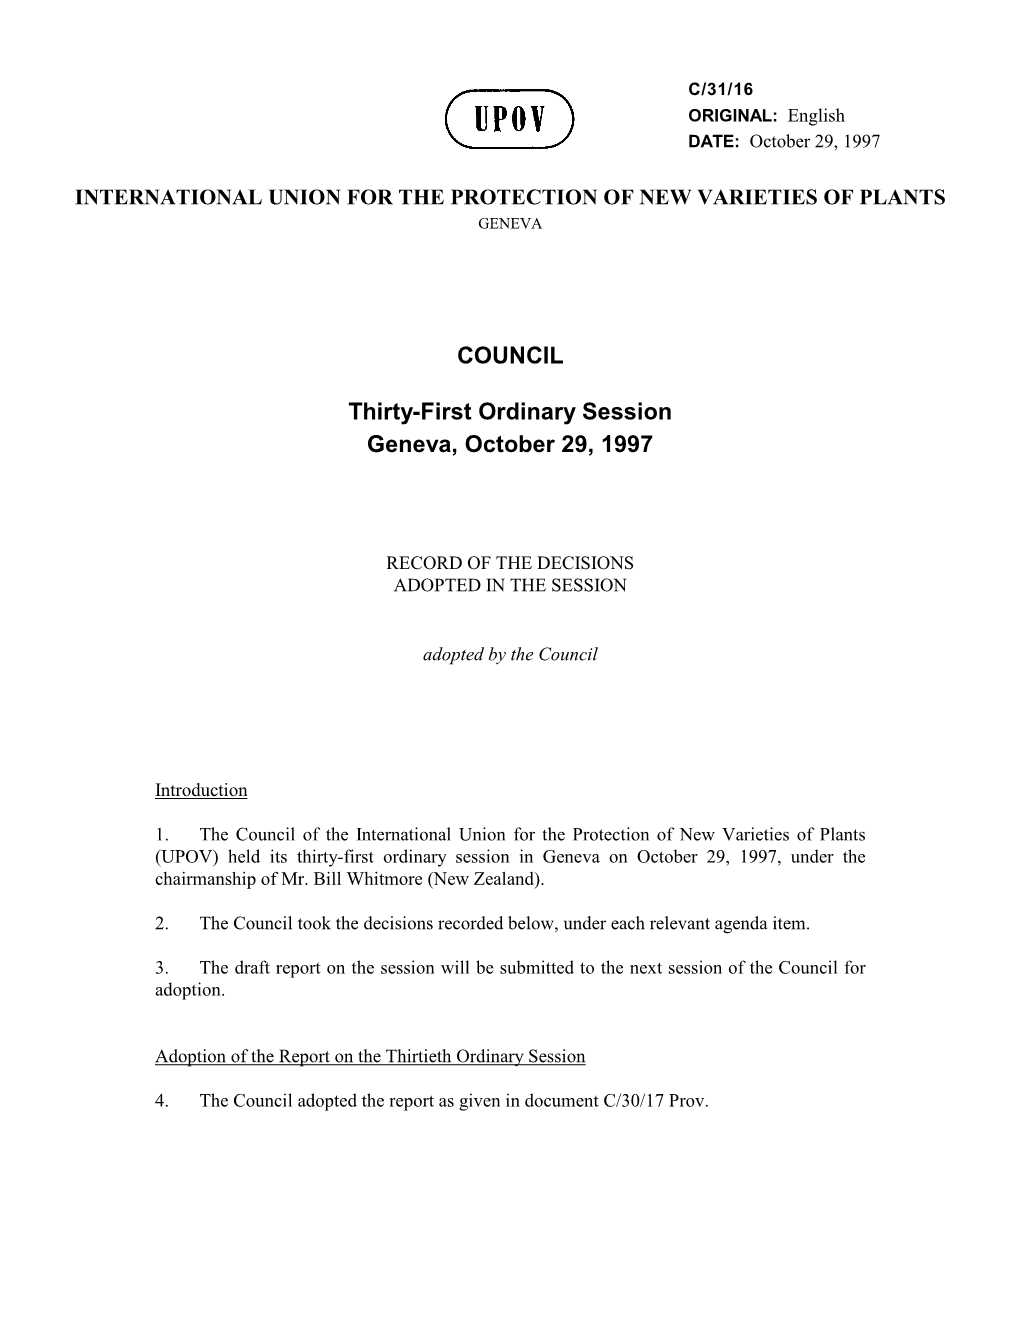 COUNCIL Thirty-First Ordinary Session Geneva, October 29, 1997